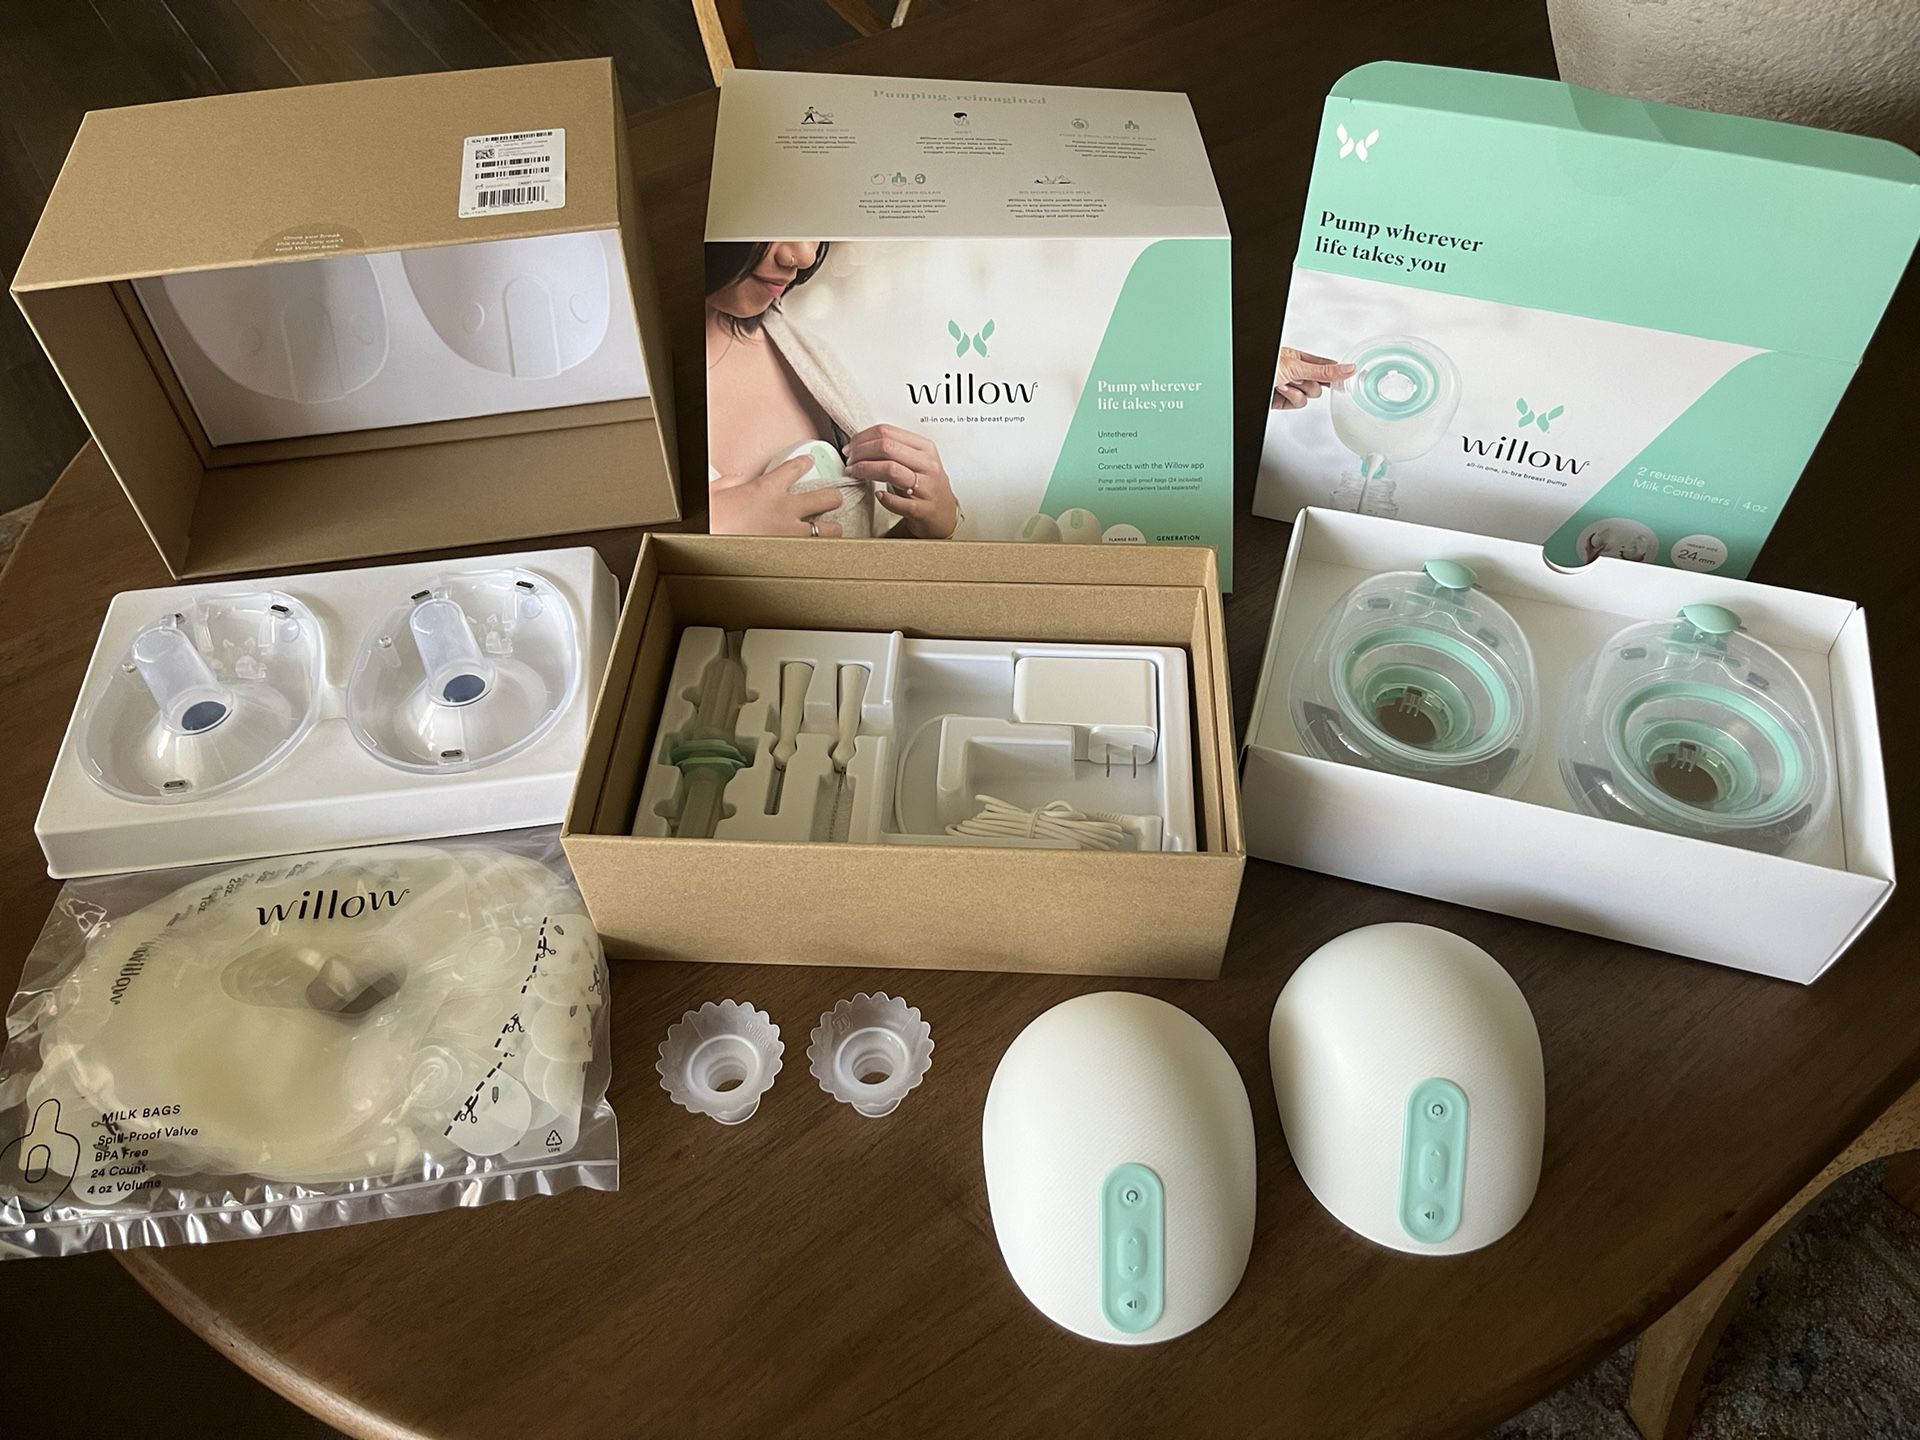 Willow 3.0 Breast Milk Containers